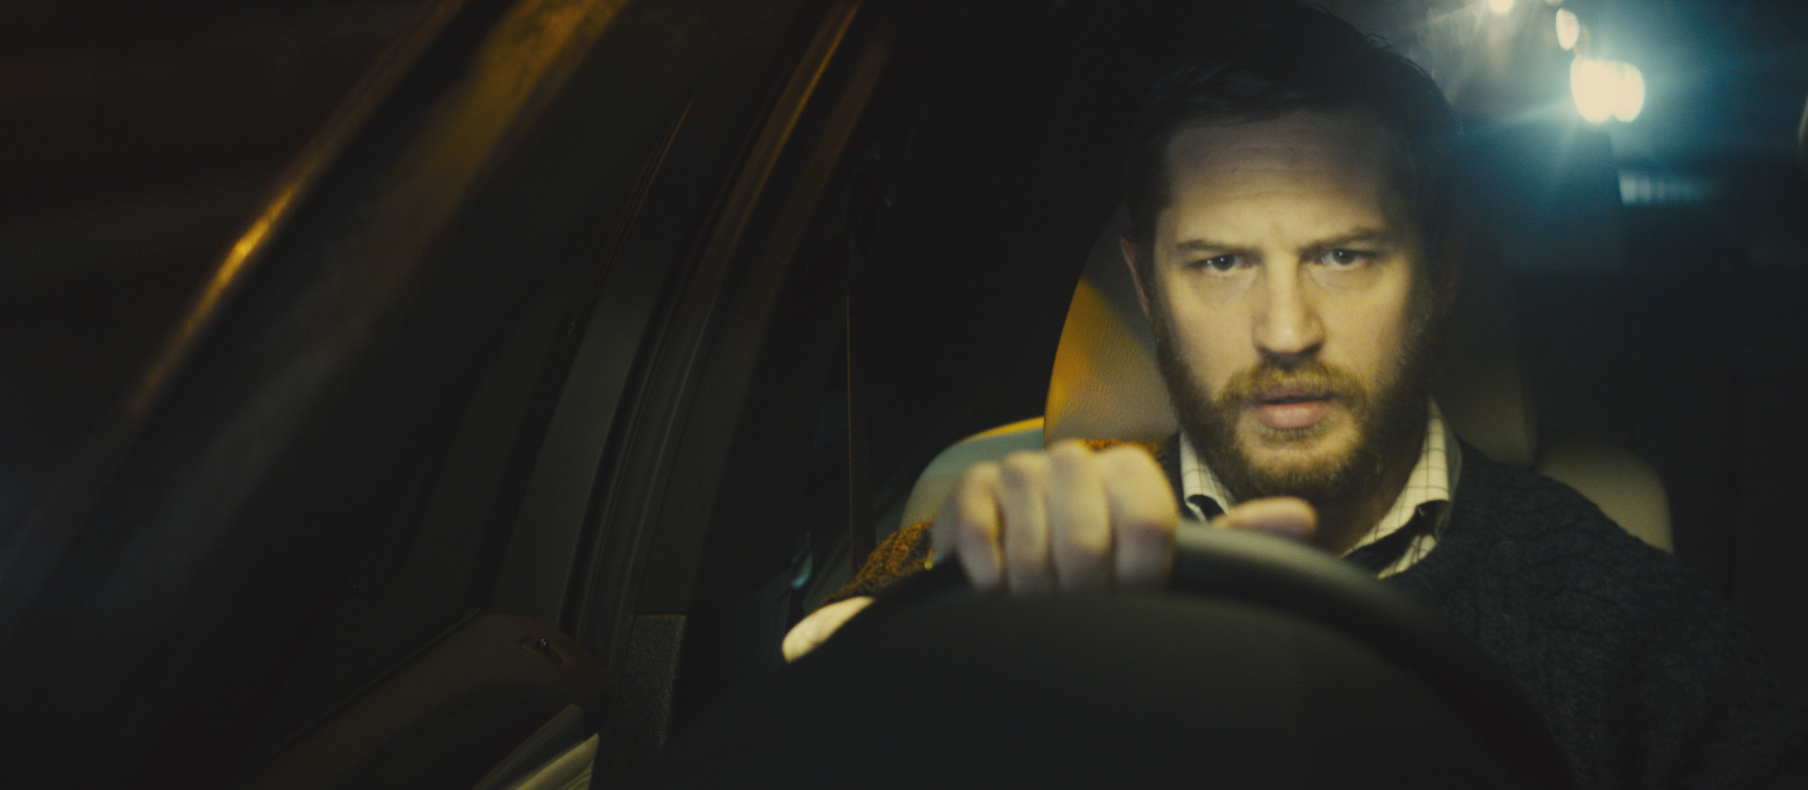 Locke Movie Review: Tom Hardy in a Car | Time